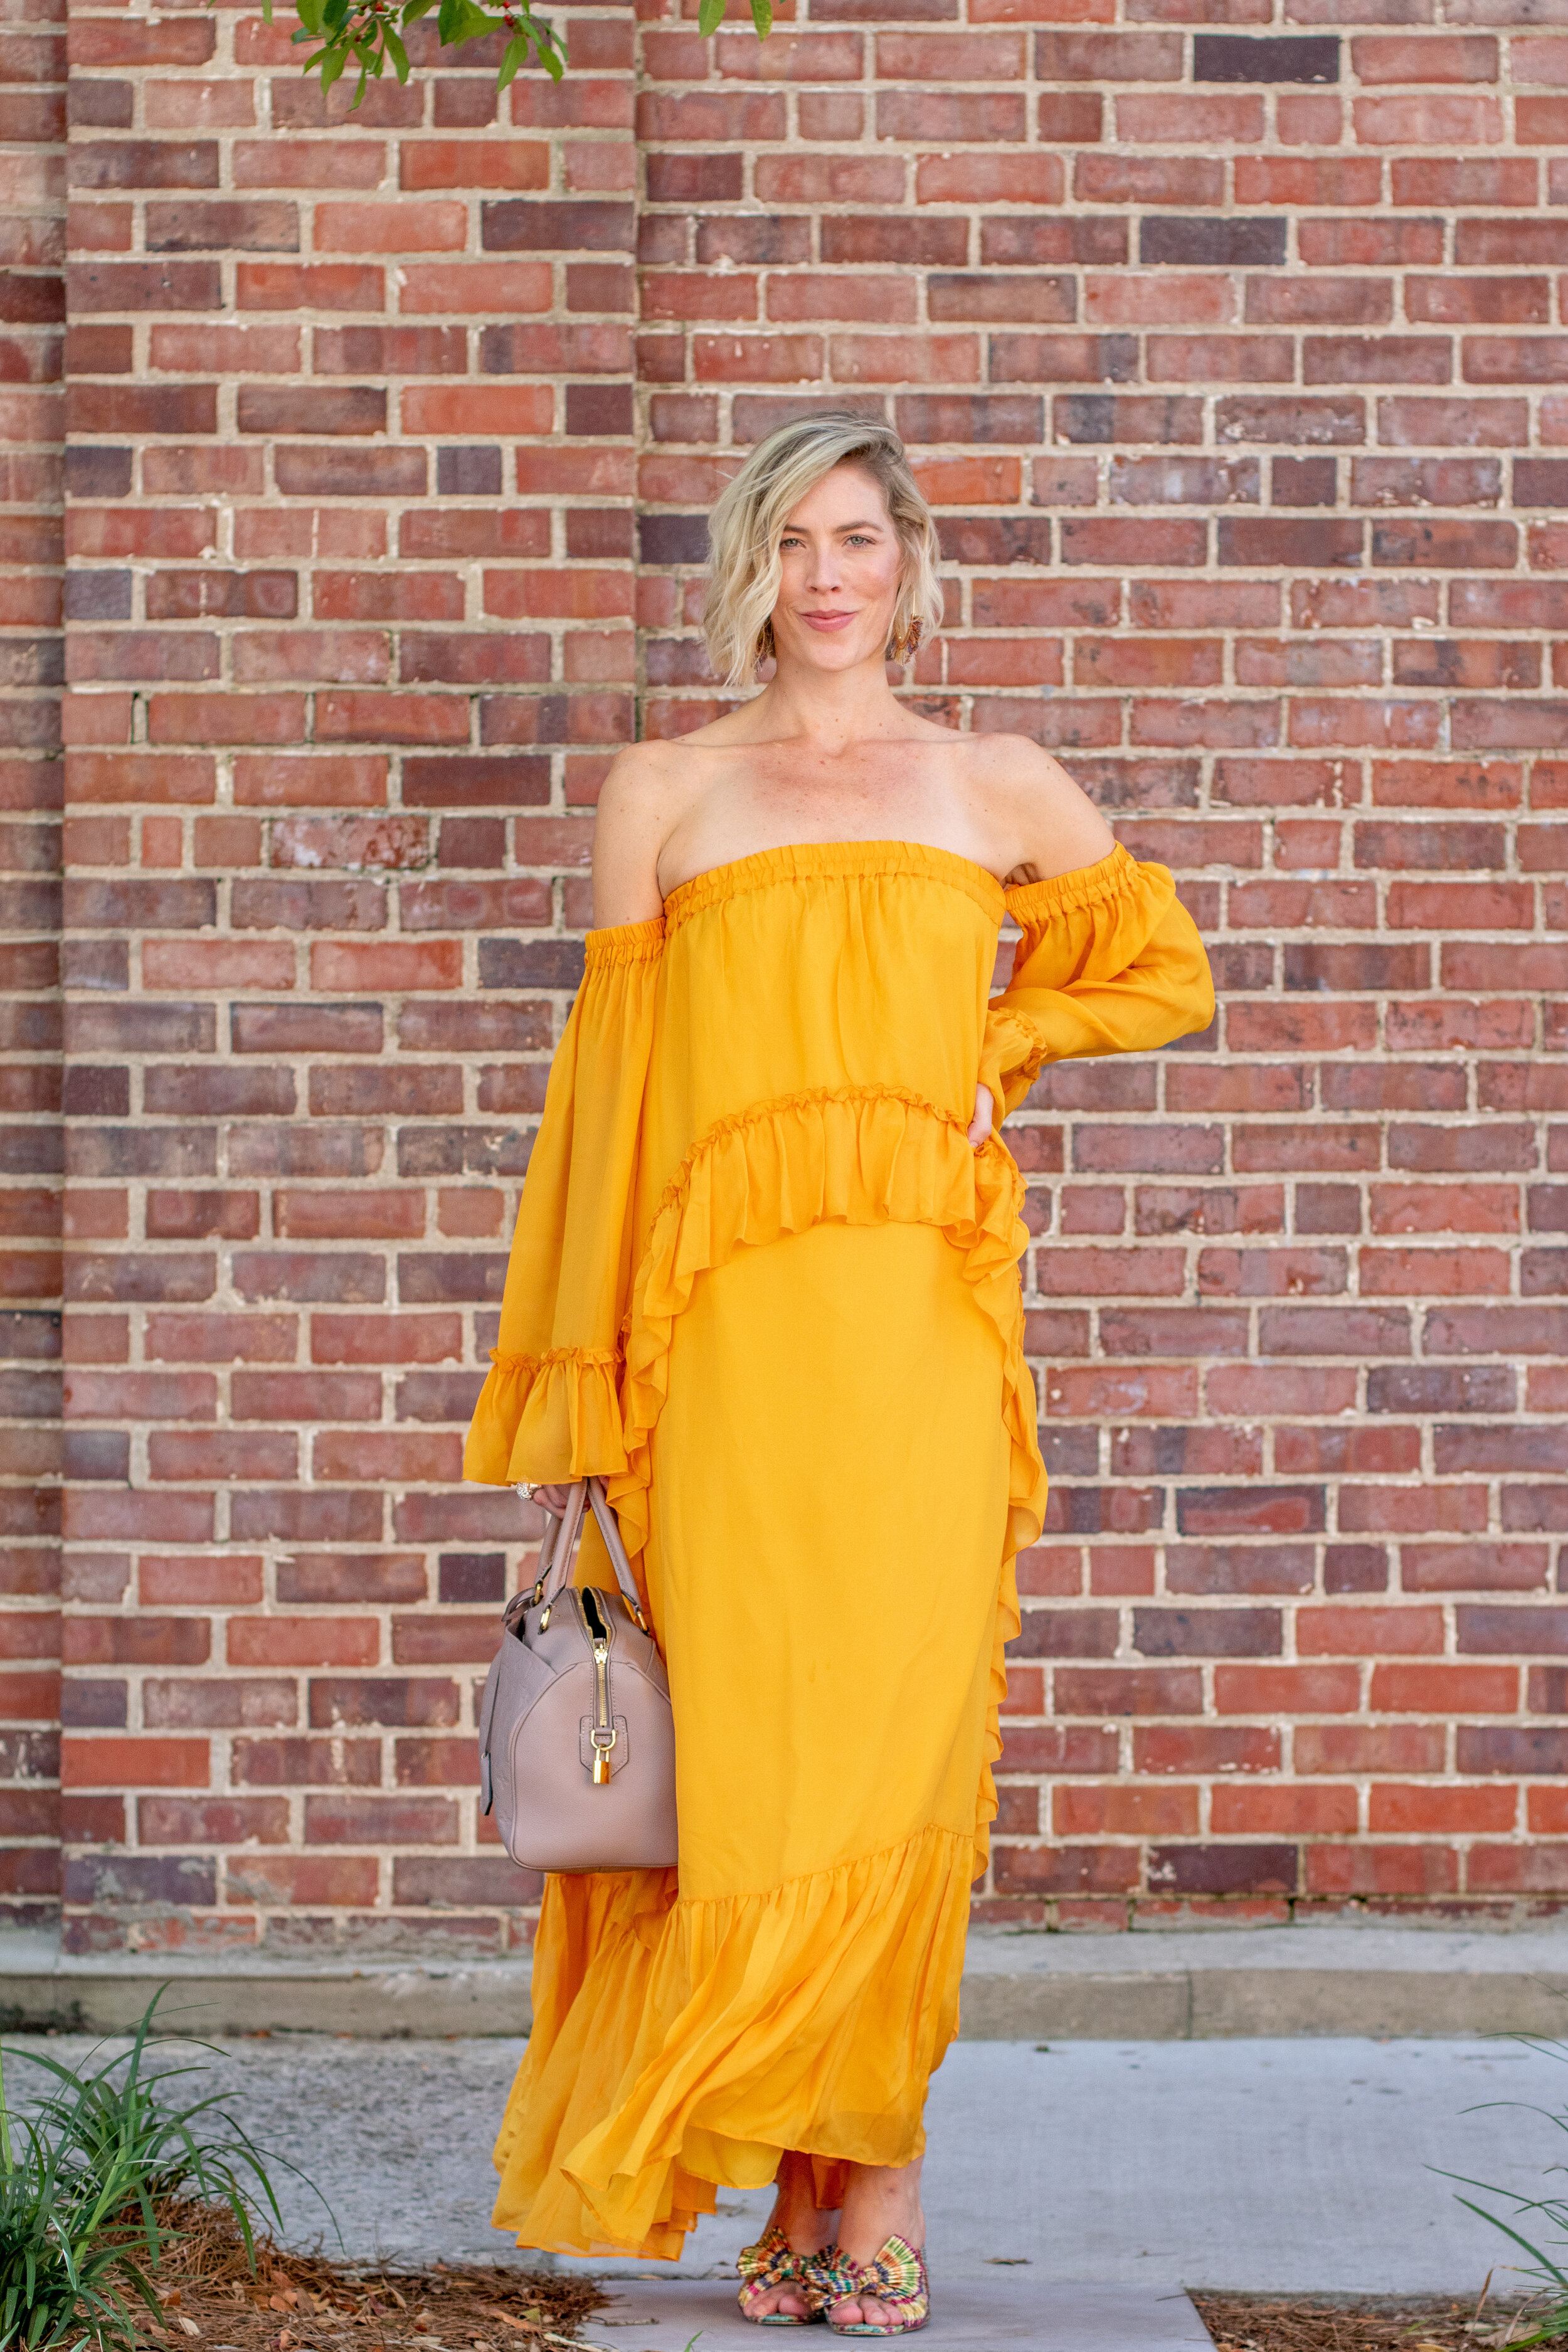 Stephanie Mack The Borrowed Babes Fashion Blog - The Top Rented Styles for a Hot Southern Fall